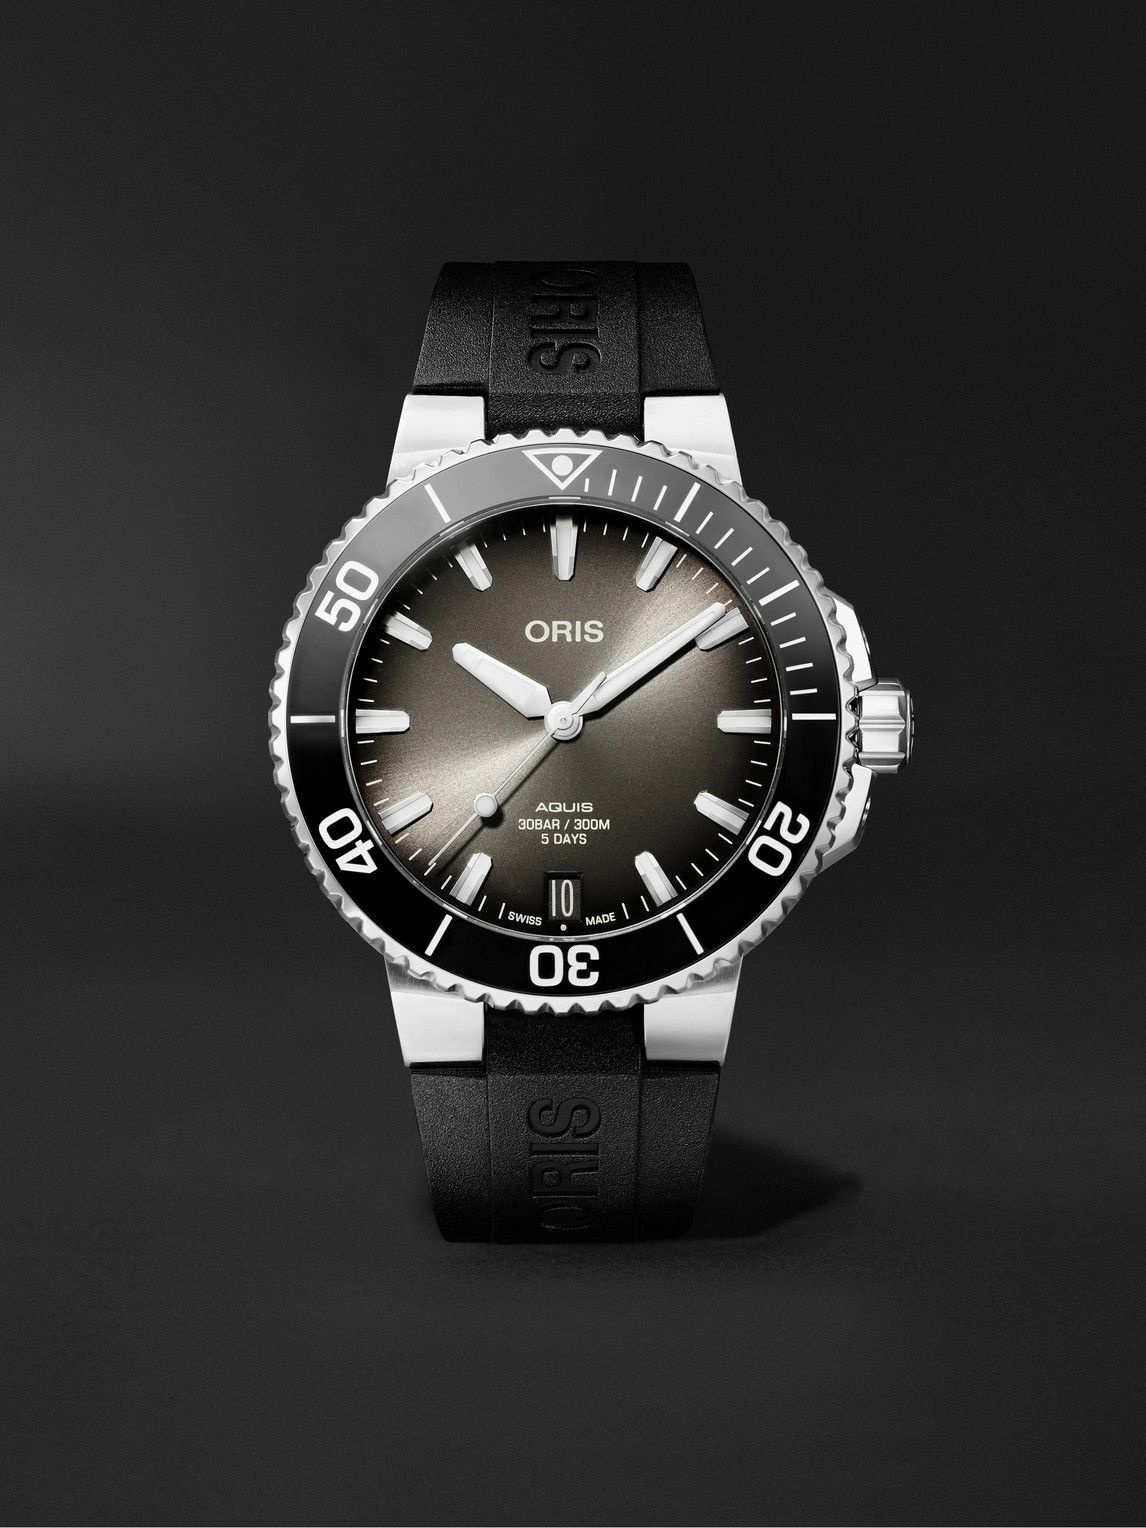 Photo: Oris - Aquis Date Automatic 41.5mm Stainless Steel and Rubber Watch, Ref. No. 01 400 7769 4154-07 4 22 74FC